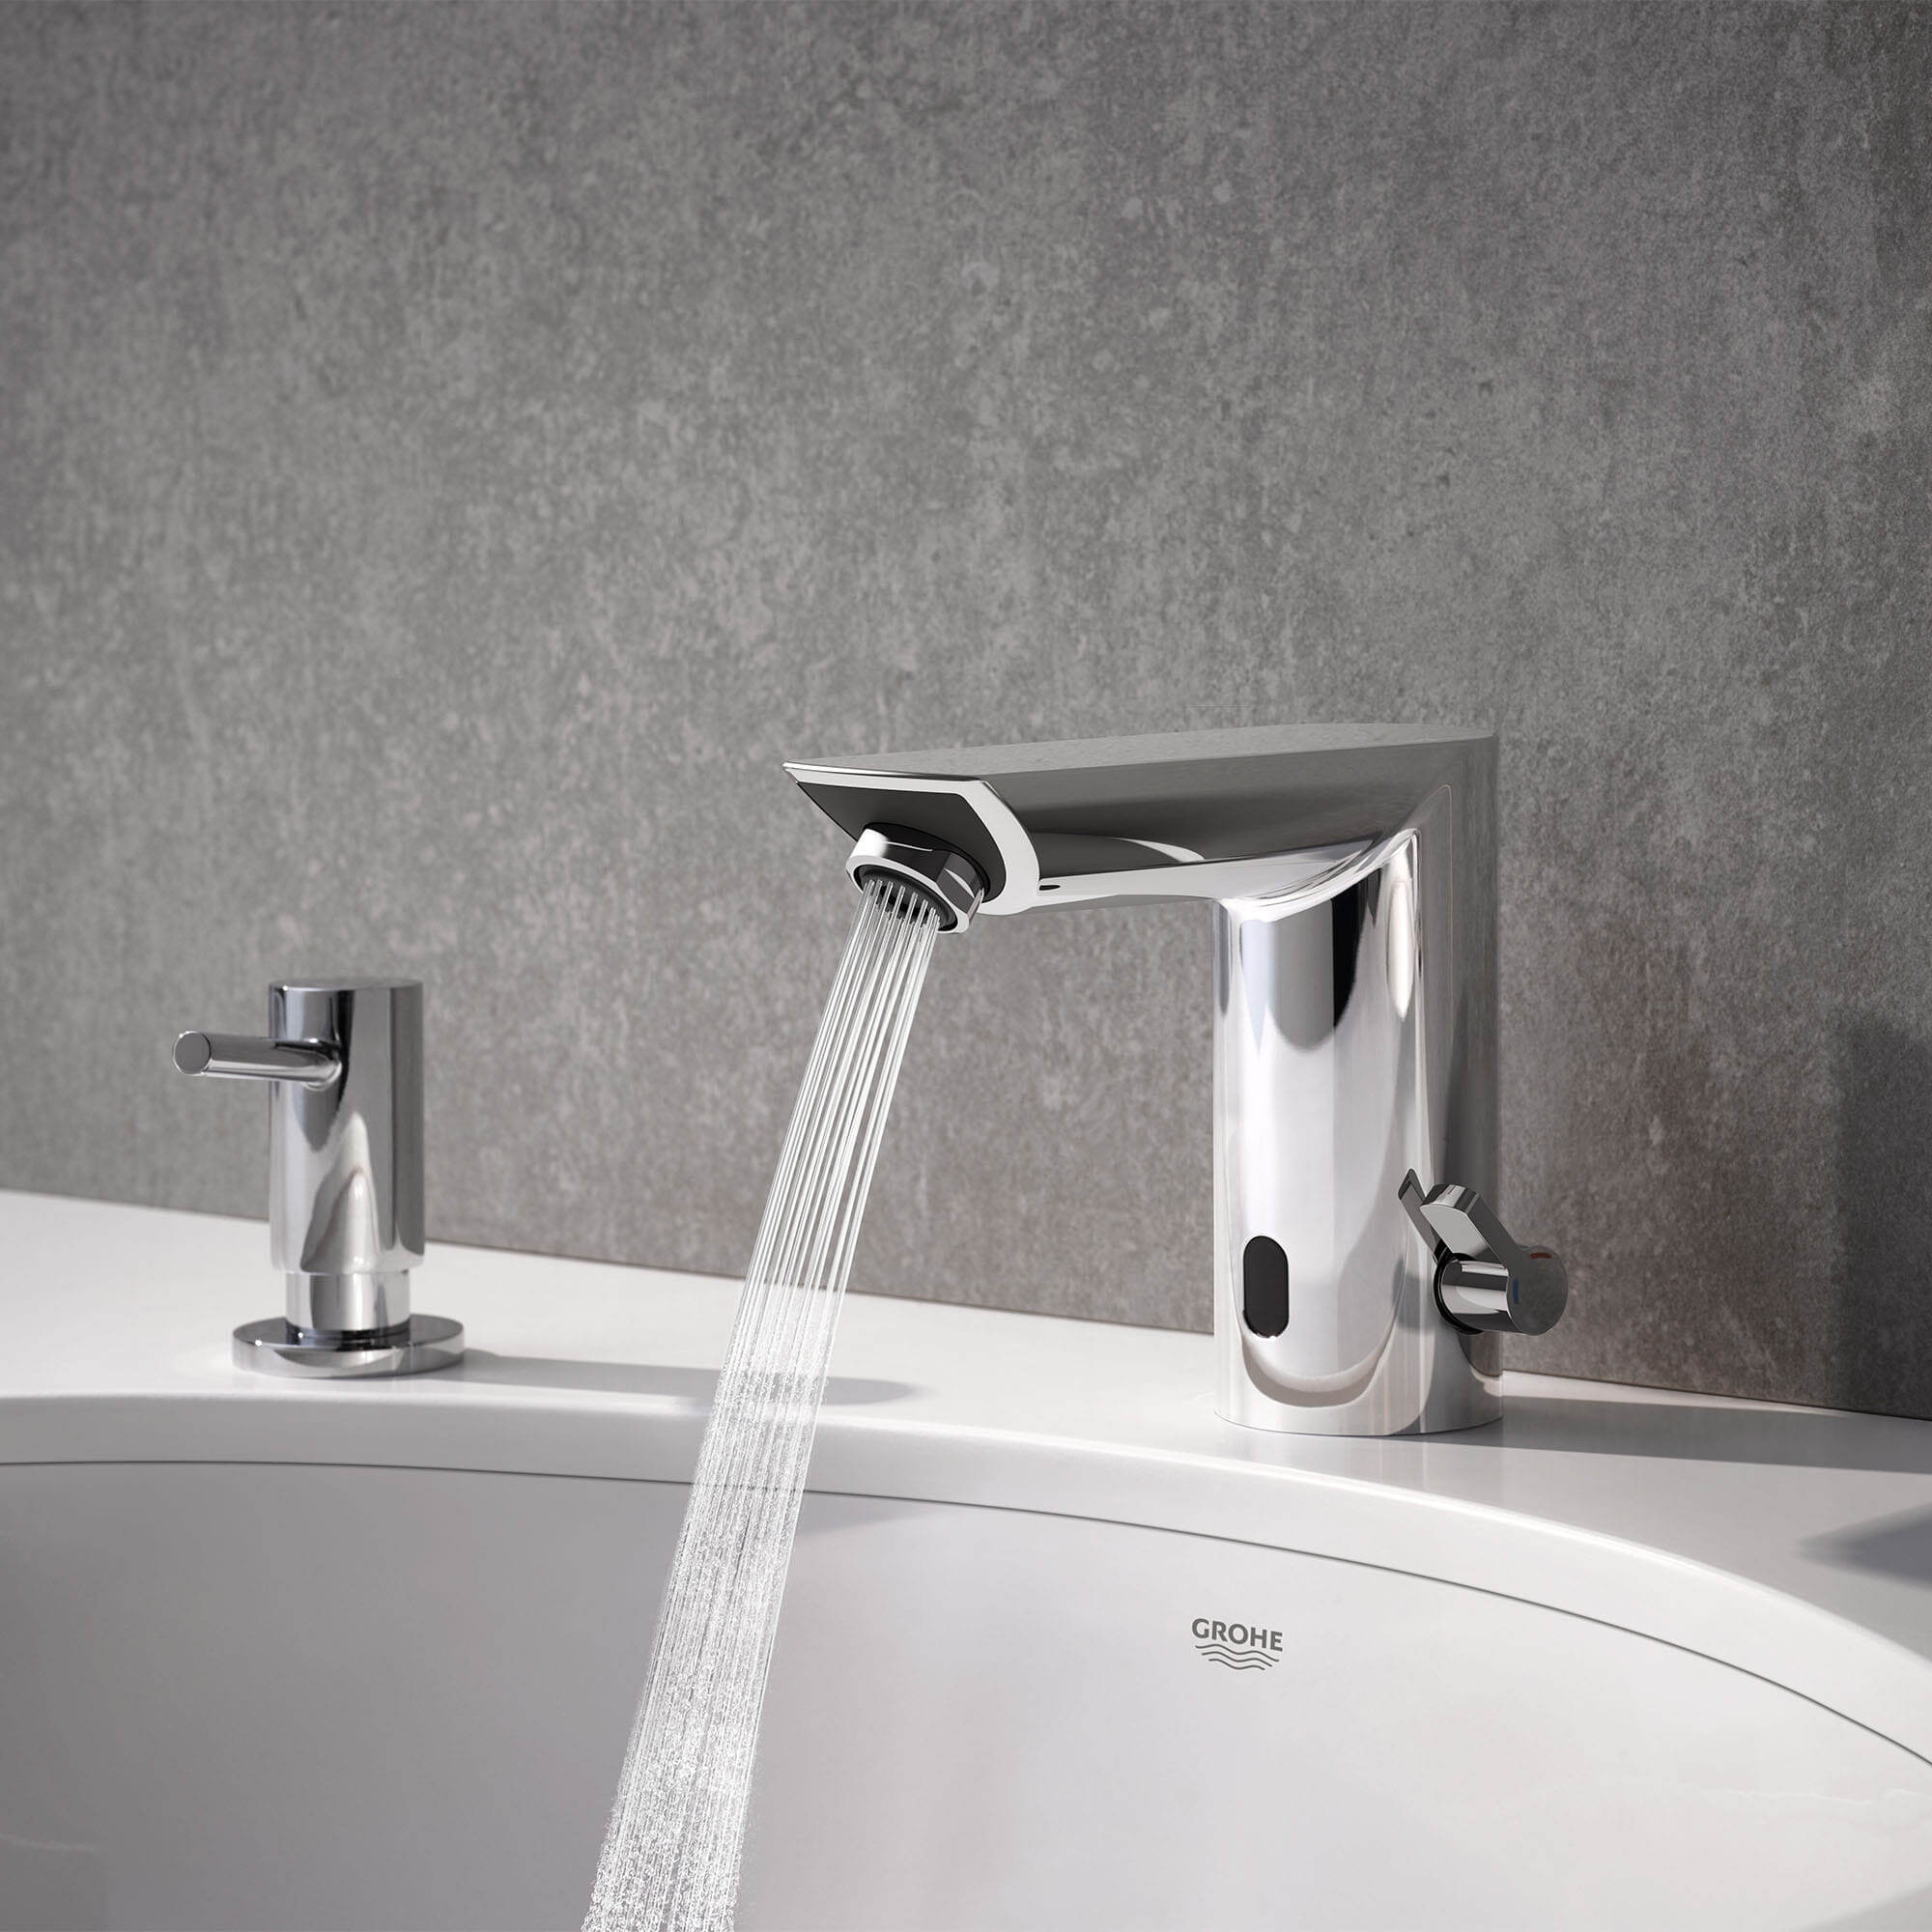 15 Best Touchless Bathroom Faucet for 2023